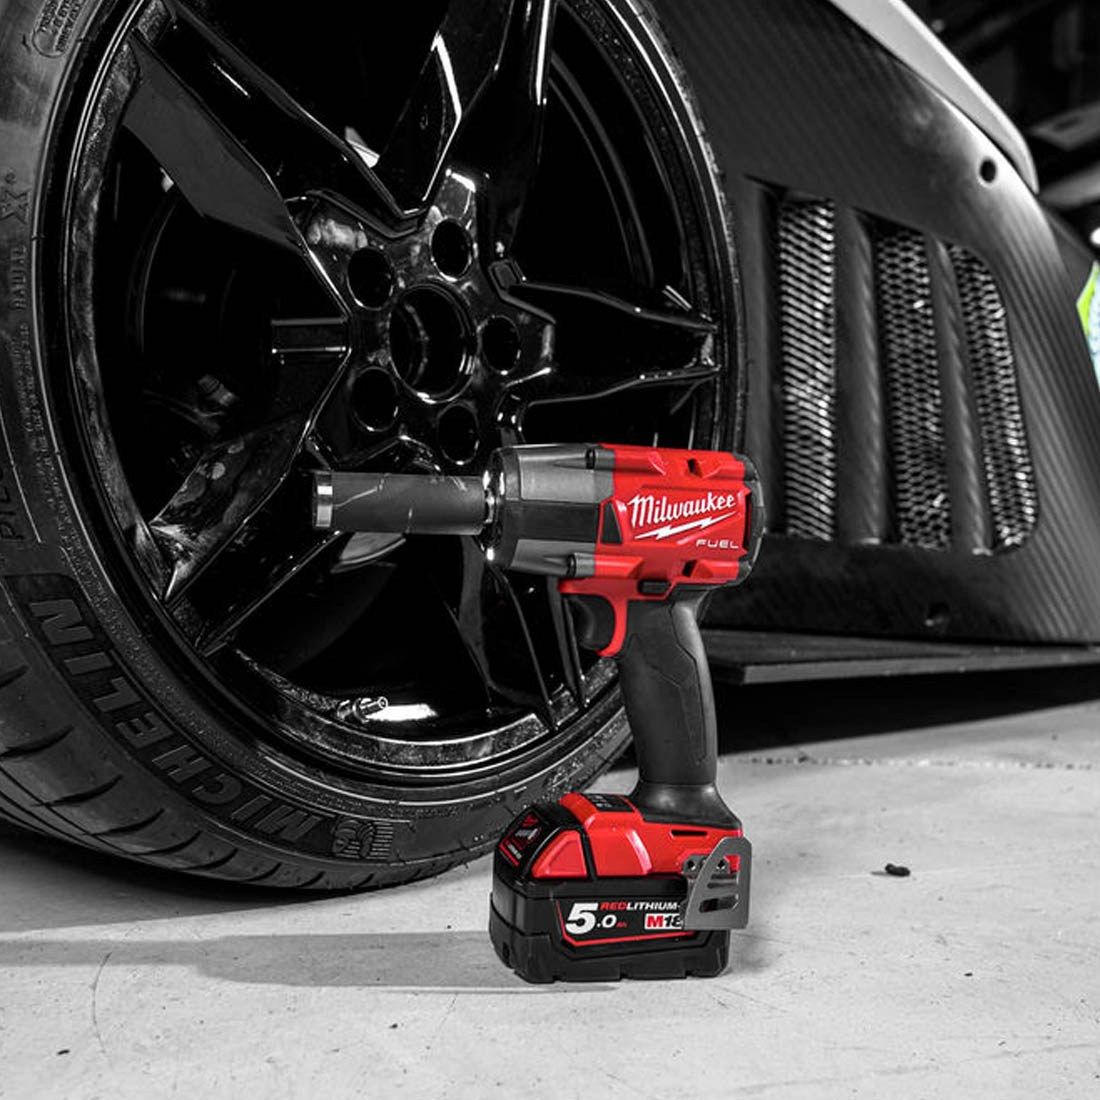 Milwaukee M18 FMTIW2F12-502X 18V Fuel Brushless 1/2" Mid-Torque Impact Wrench with 2 x 5.0Ah Batteries Charger & Case